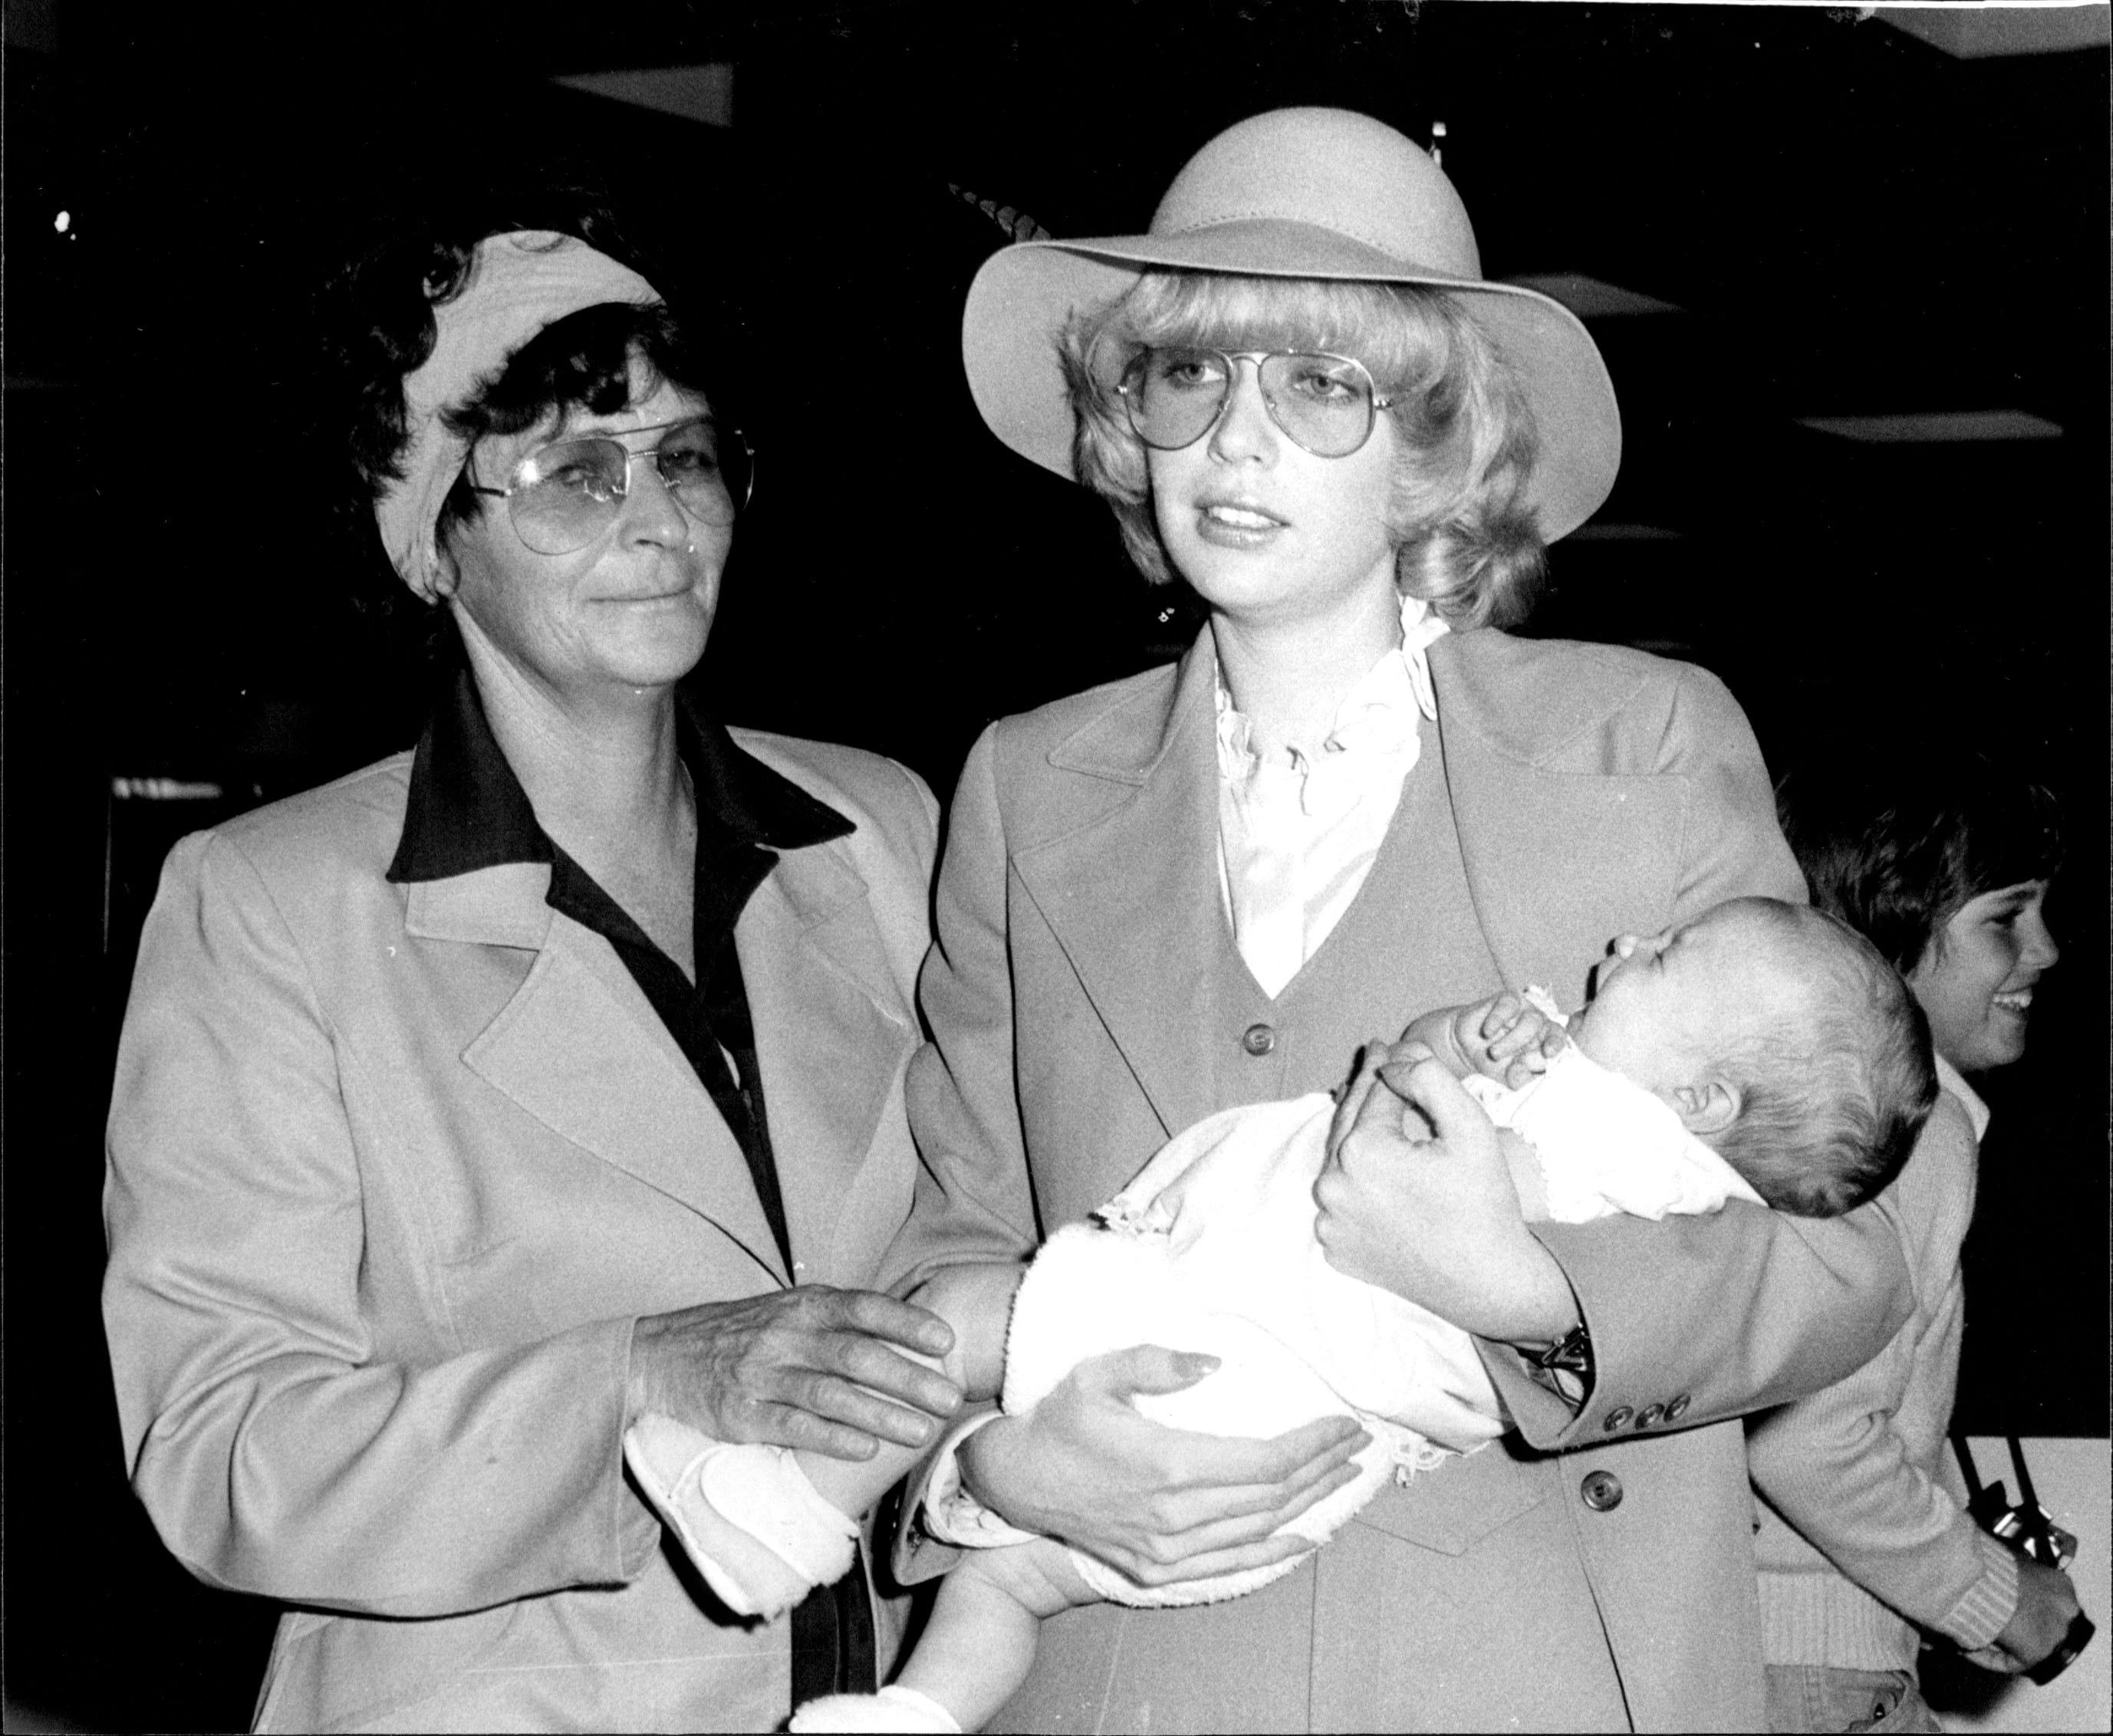 Kim Reeder with her baby girl Peta and her mother, Yvonne Reeder, on March 2, 1978 | Source: Getty Images